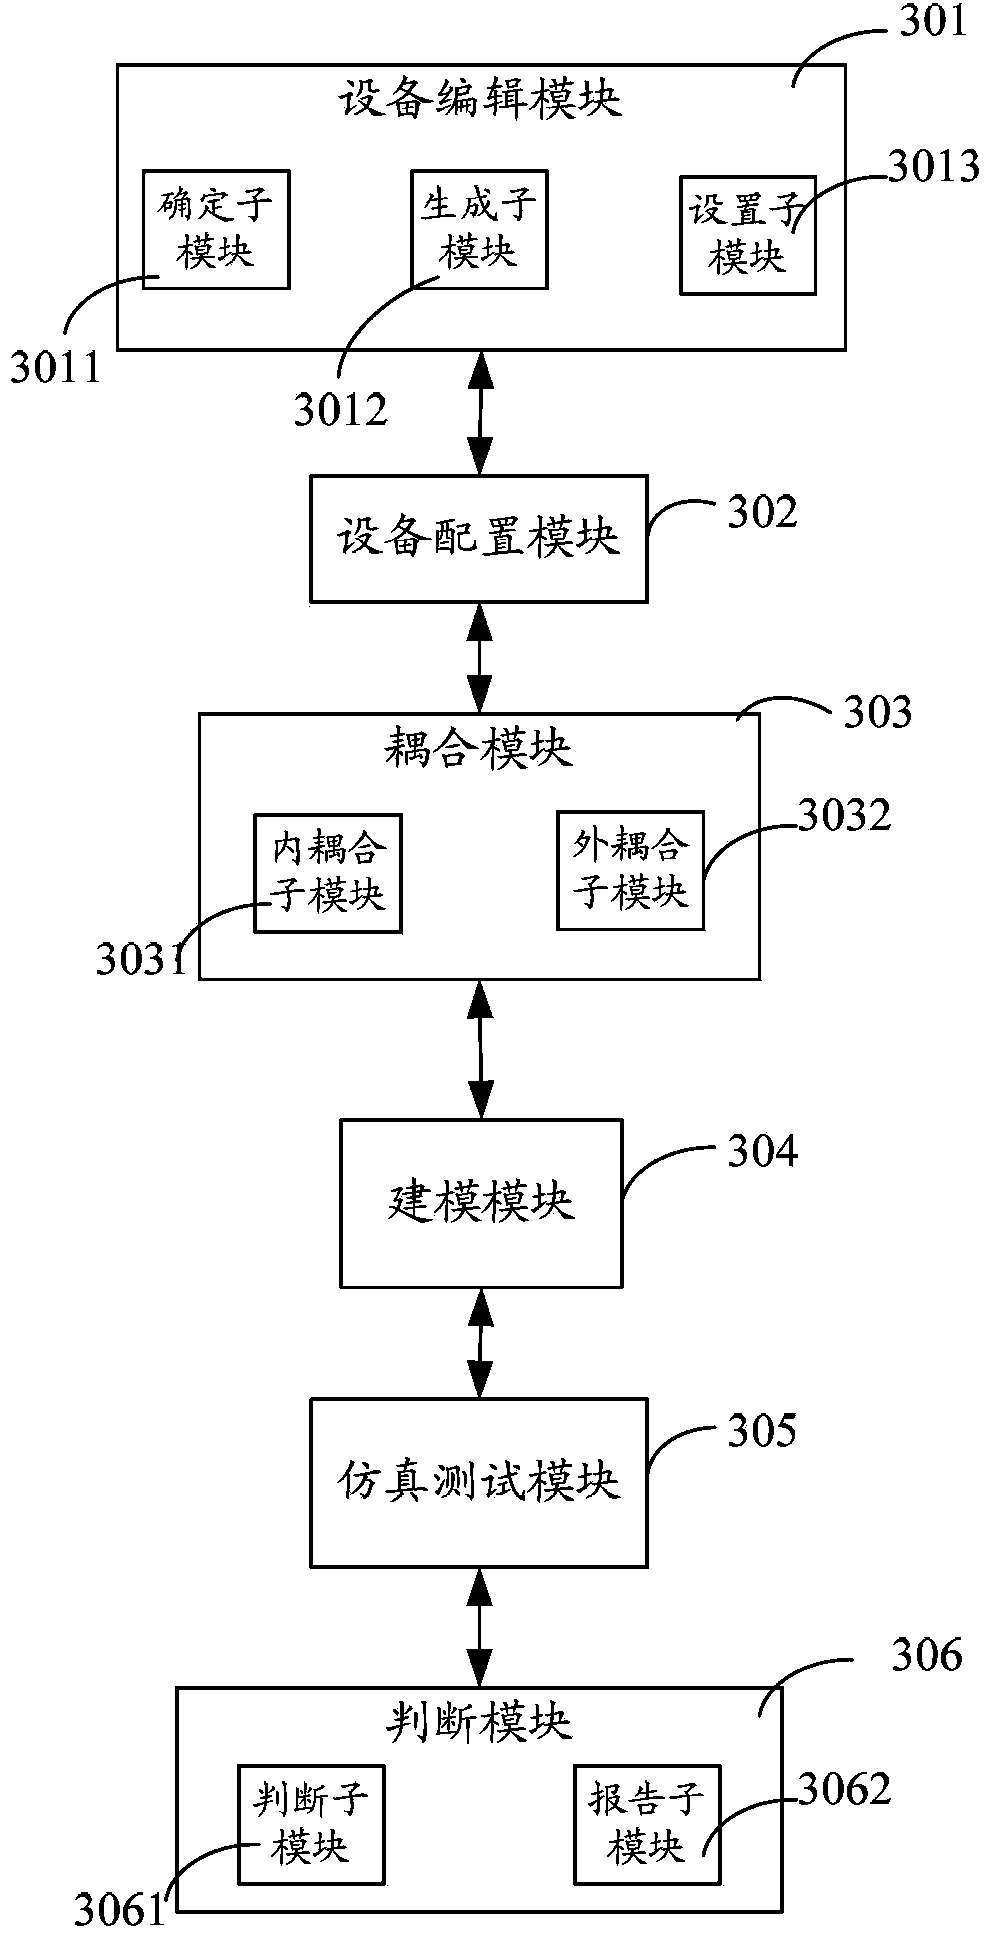 Method, system and device for control system simulation testing in semiconductor manufacturing process